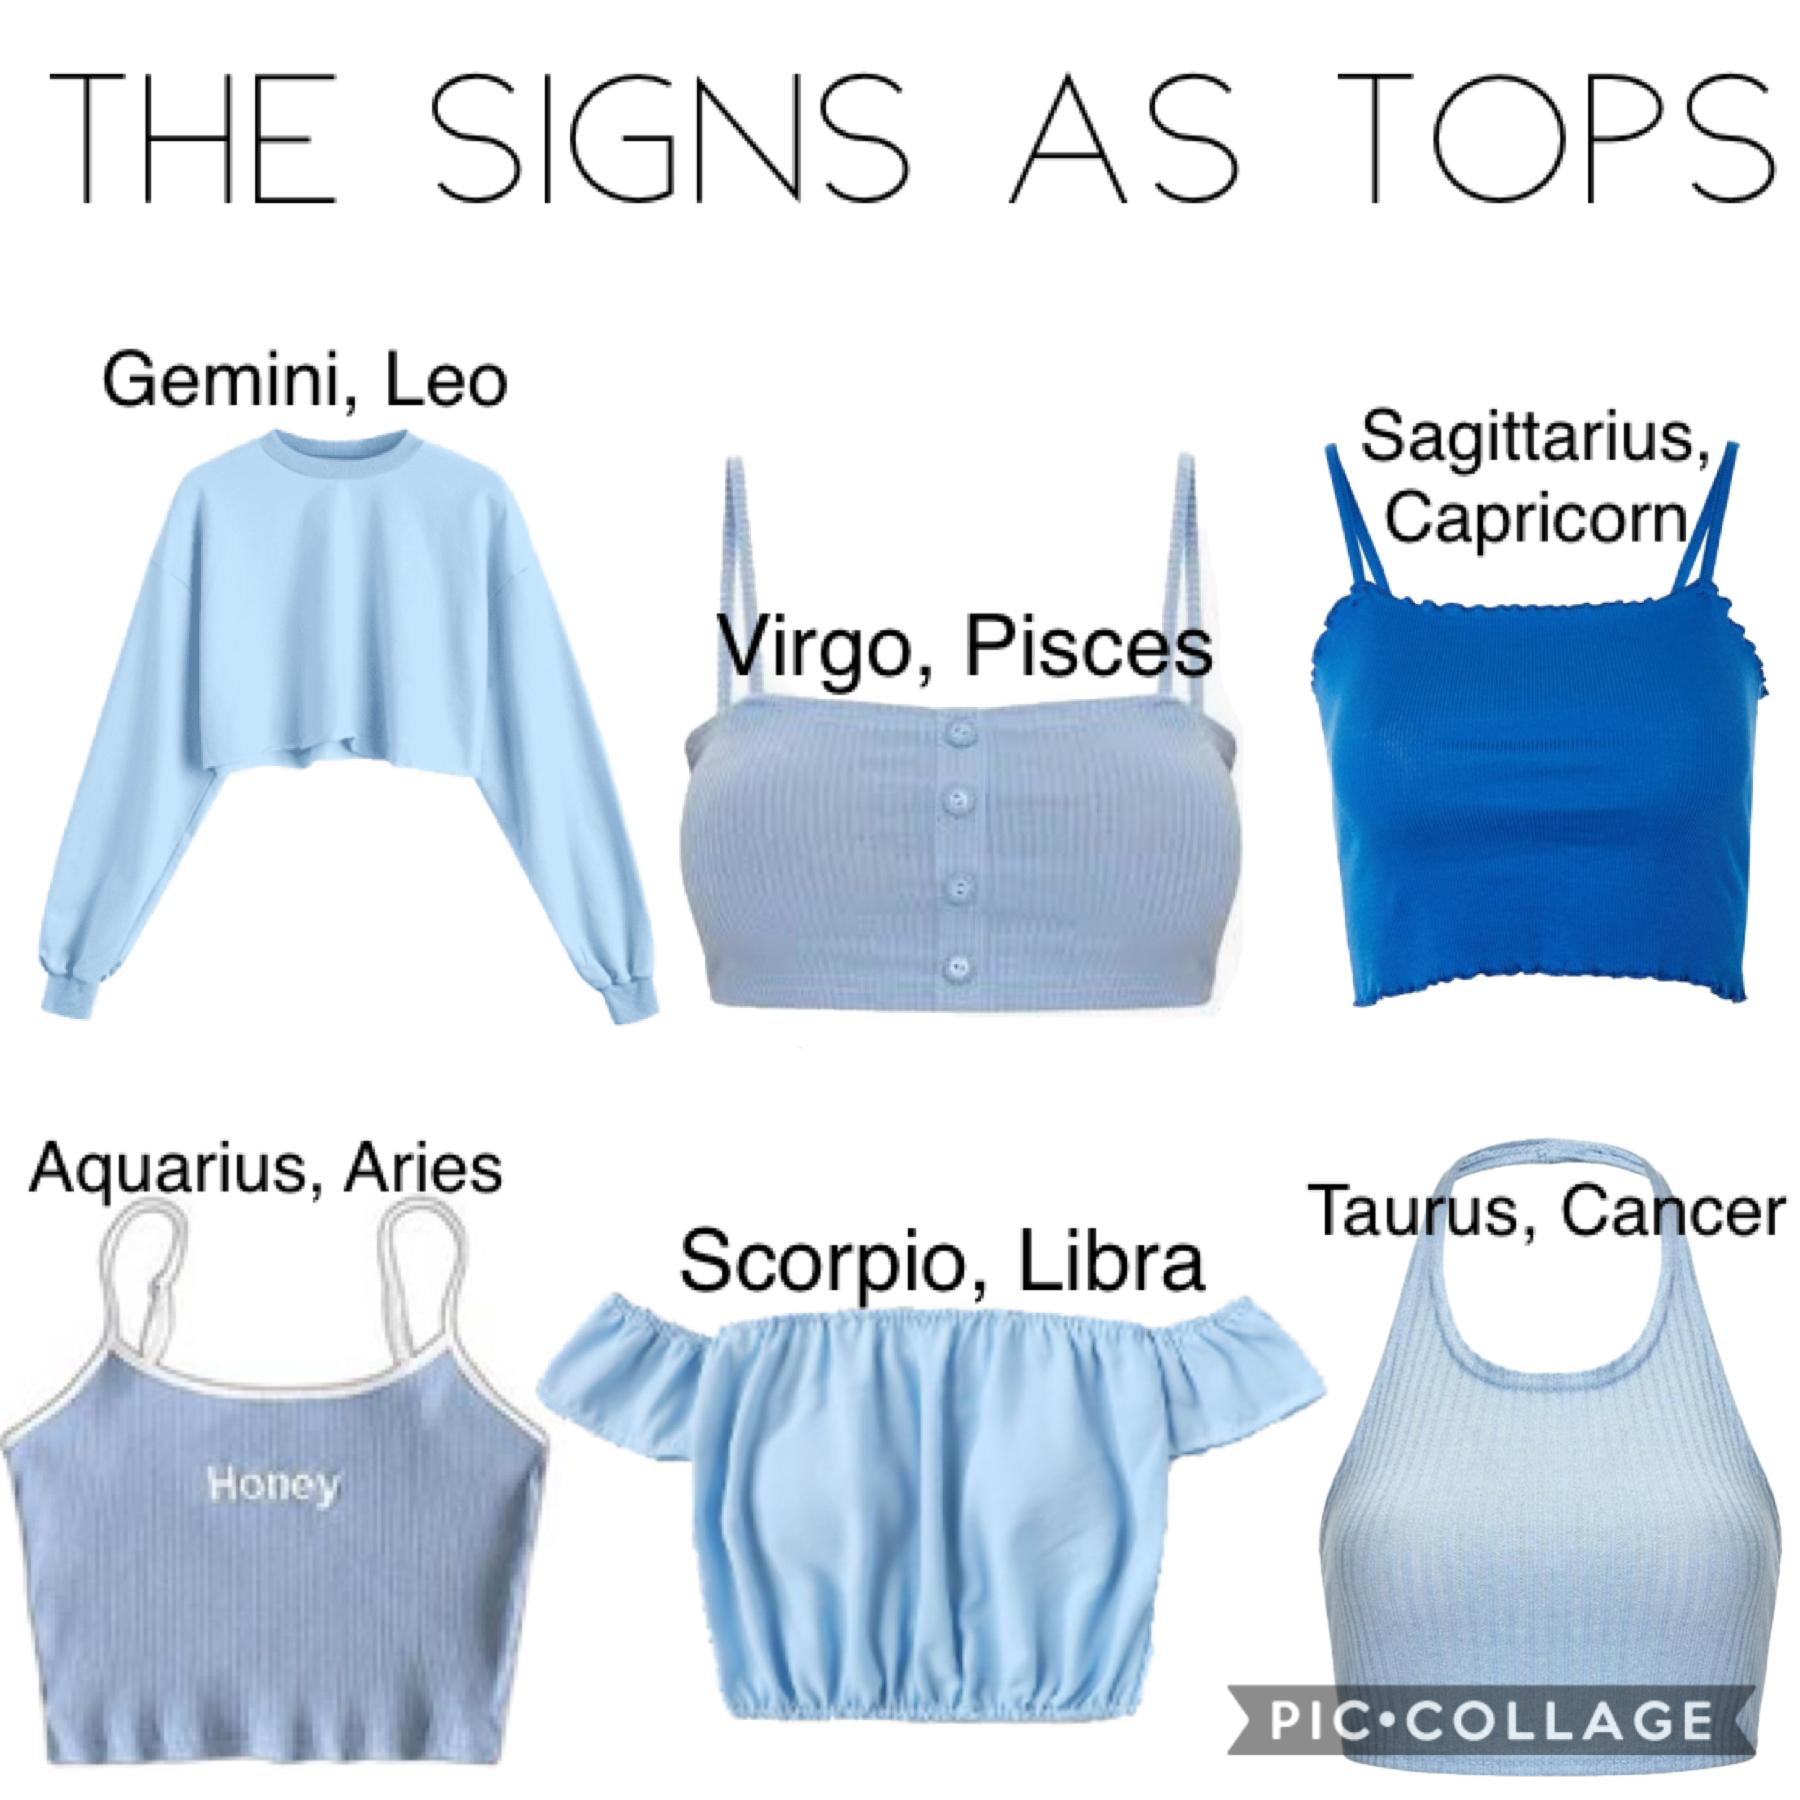 which top did you get??